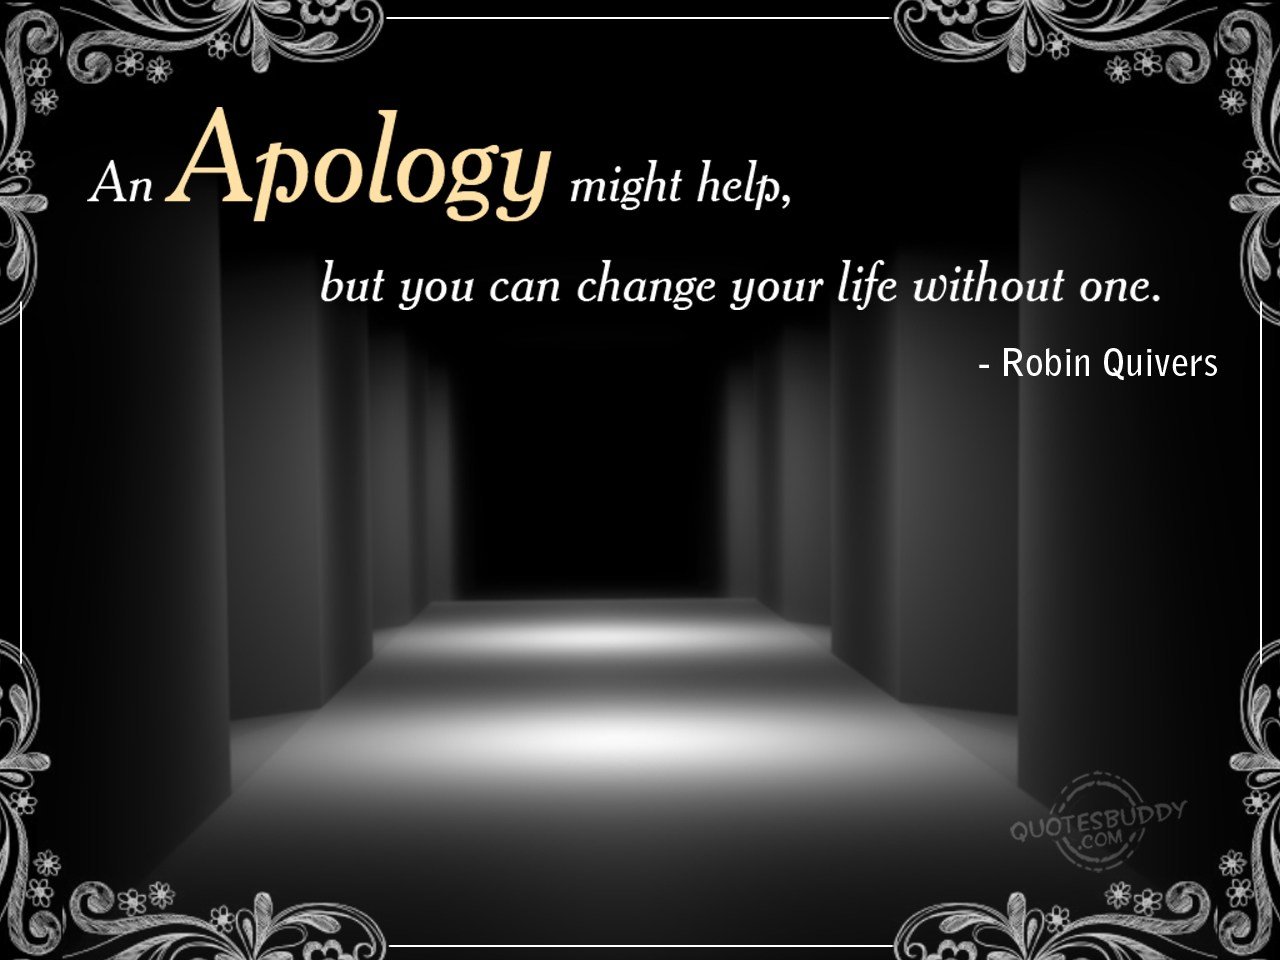 An apology might help, but you can change your life without one. - Robin Quivers